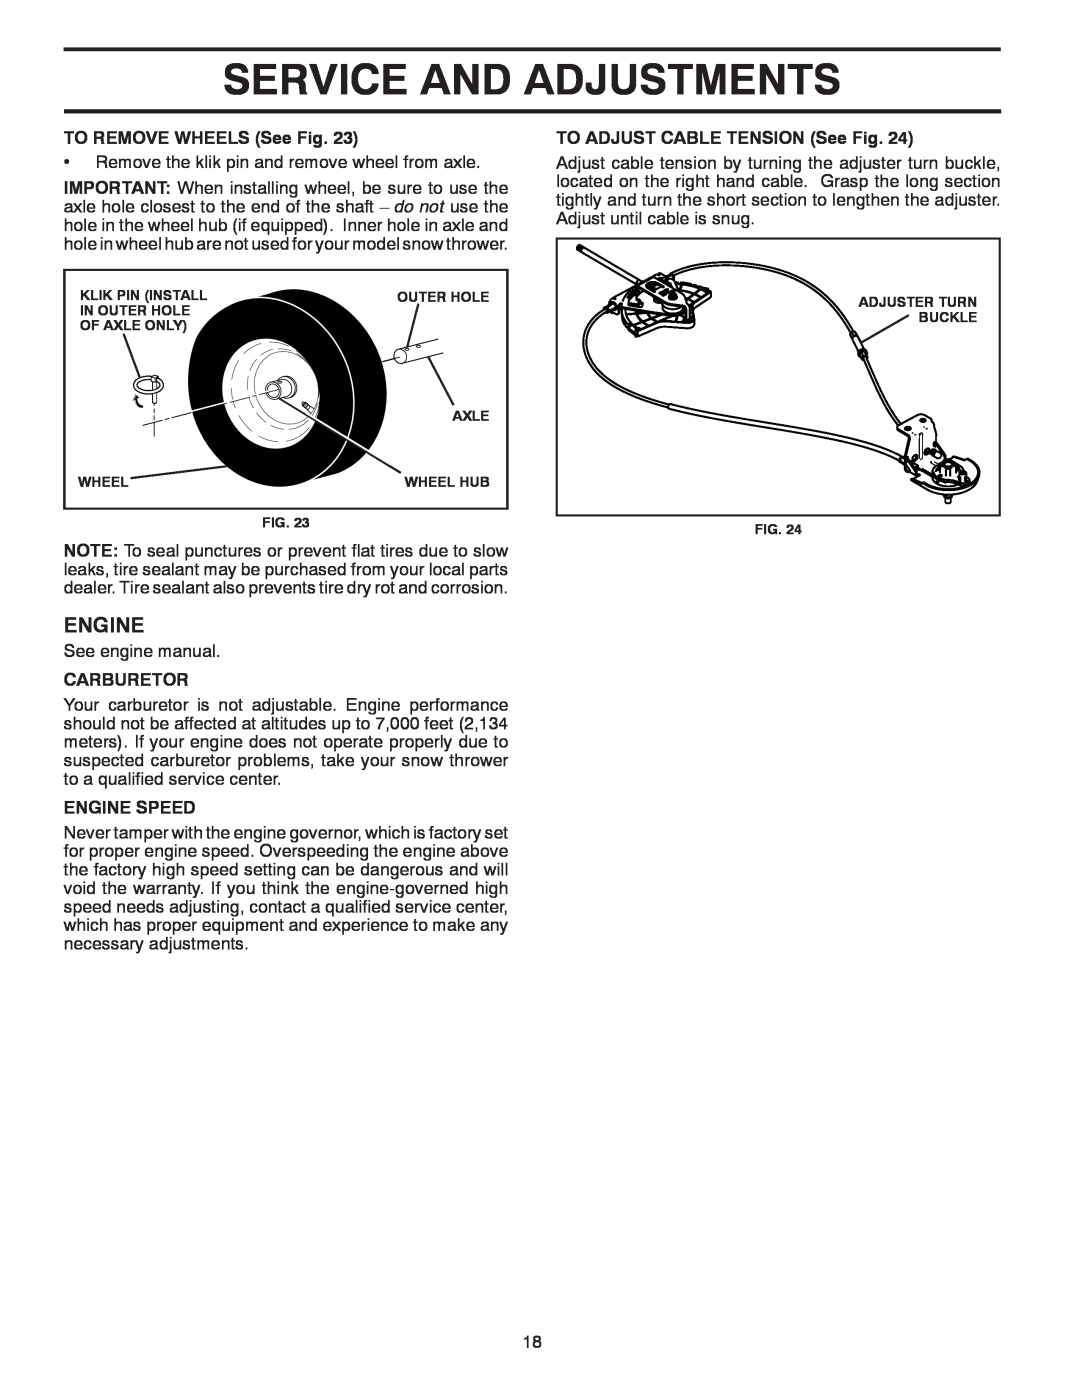 Poulan 428556 owner manual Service And Adjustments, TO REMOVE WHEELS See Fig, Carburetor, Engine Speed 